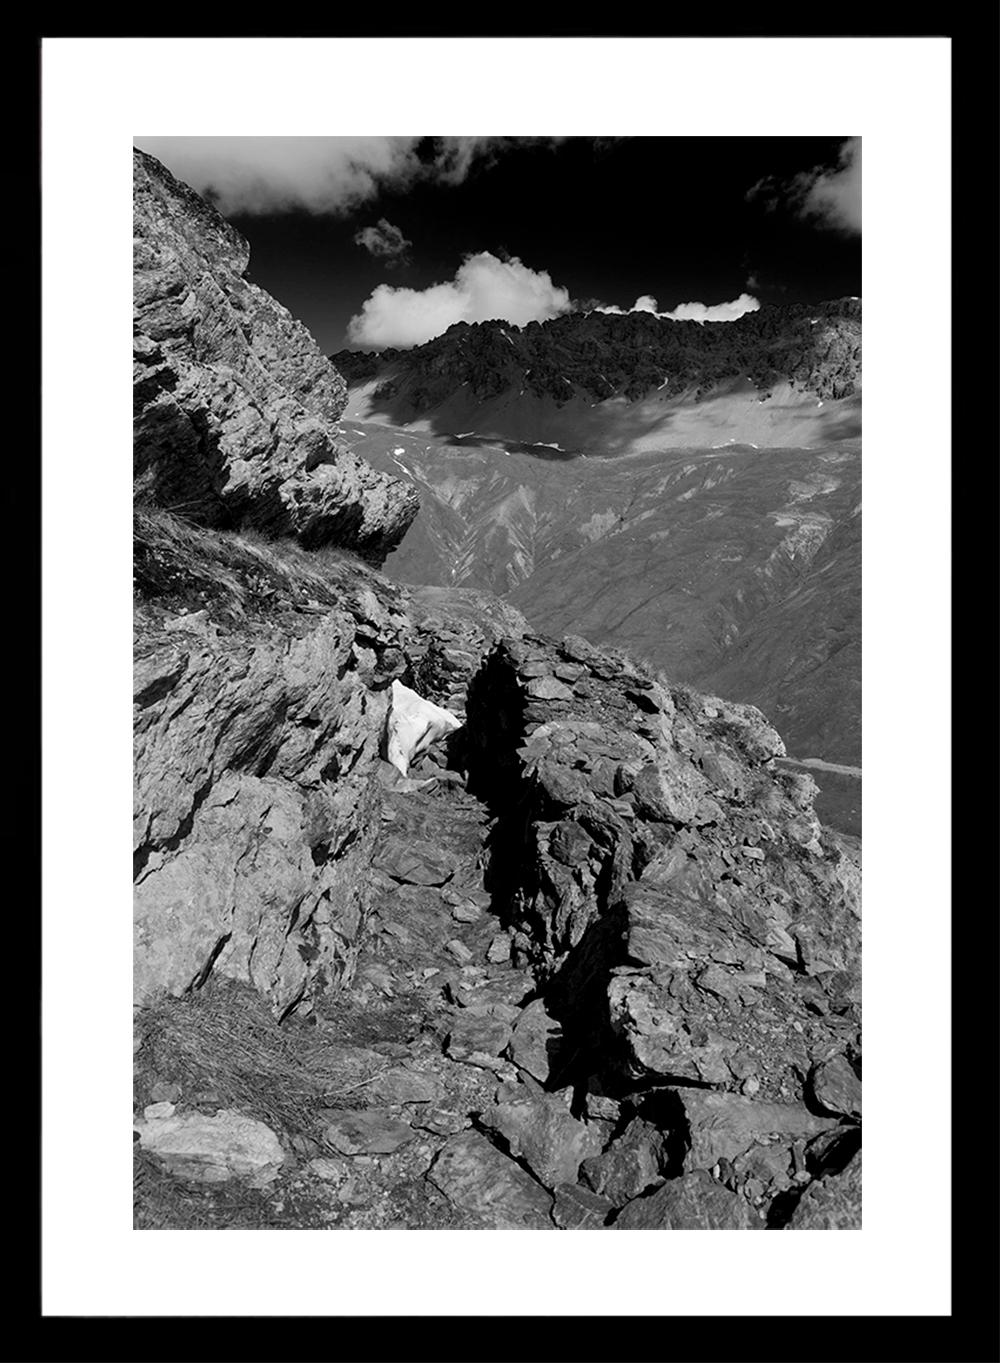 Luca Artioli Black and White Photograph - A Fatal Pass, trenches in the Italian Alps. Landscape black and white photograph